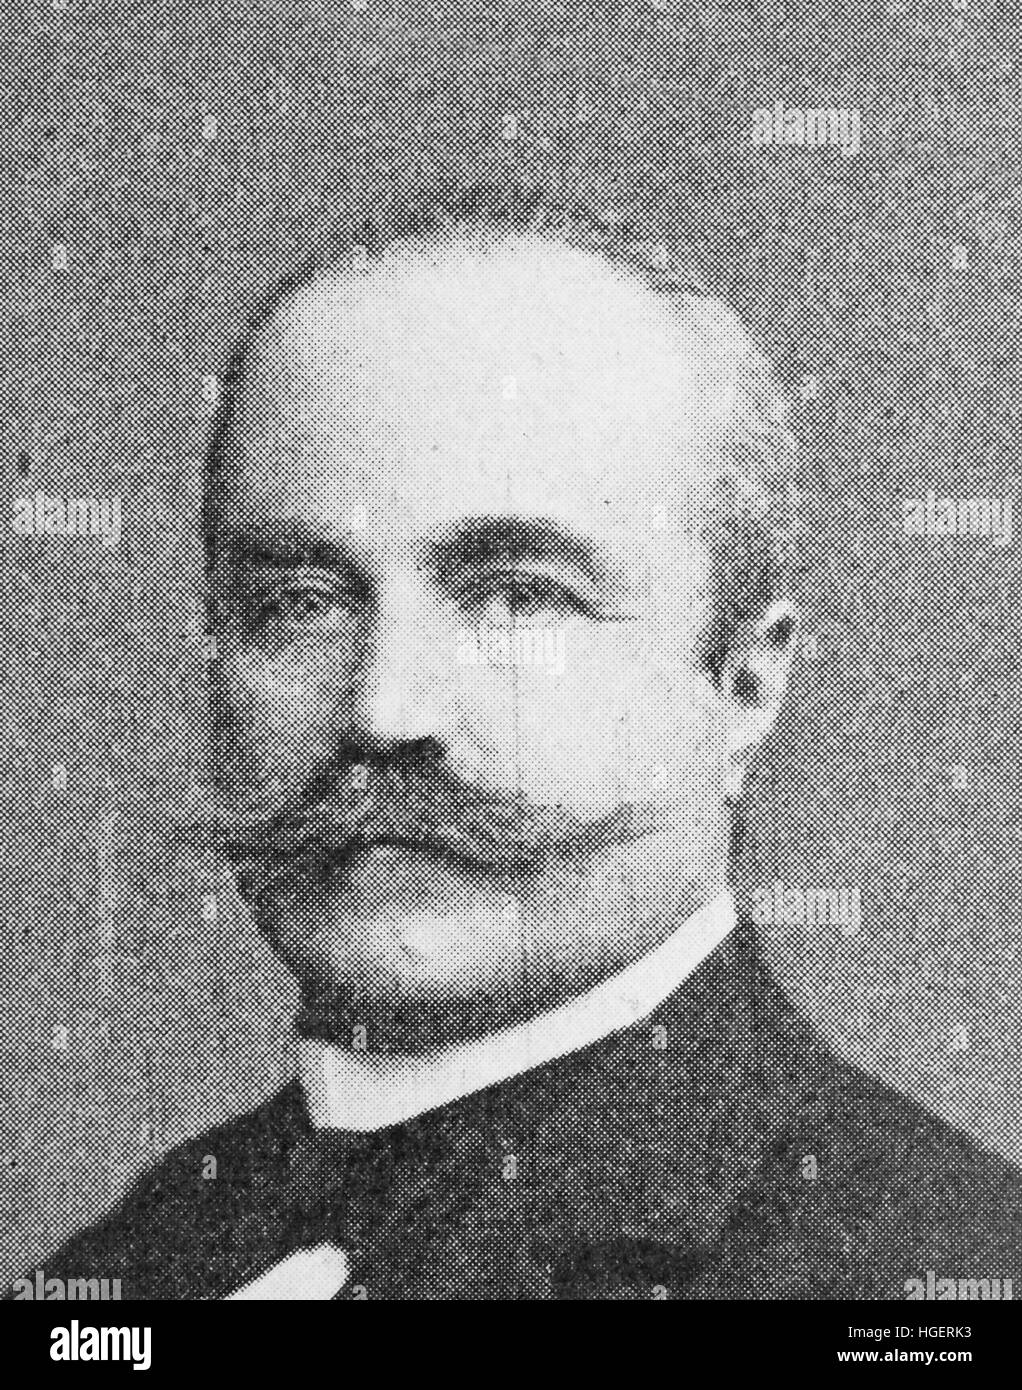 Richard von Kaufmann, Born March 29, 1849; died March 11, 1908, was a German-Nationaloekonom of Jewish, Privy Councillor, art collector and patron, reproduction of a photo from the year 1895, digital improved Stock Photo